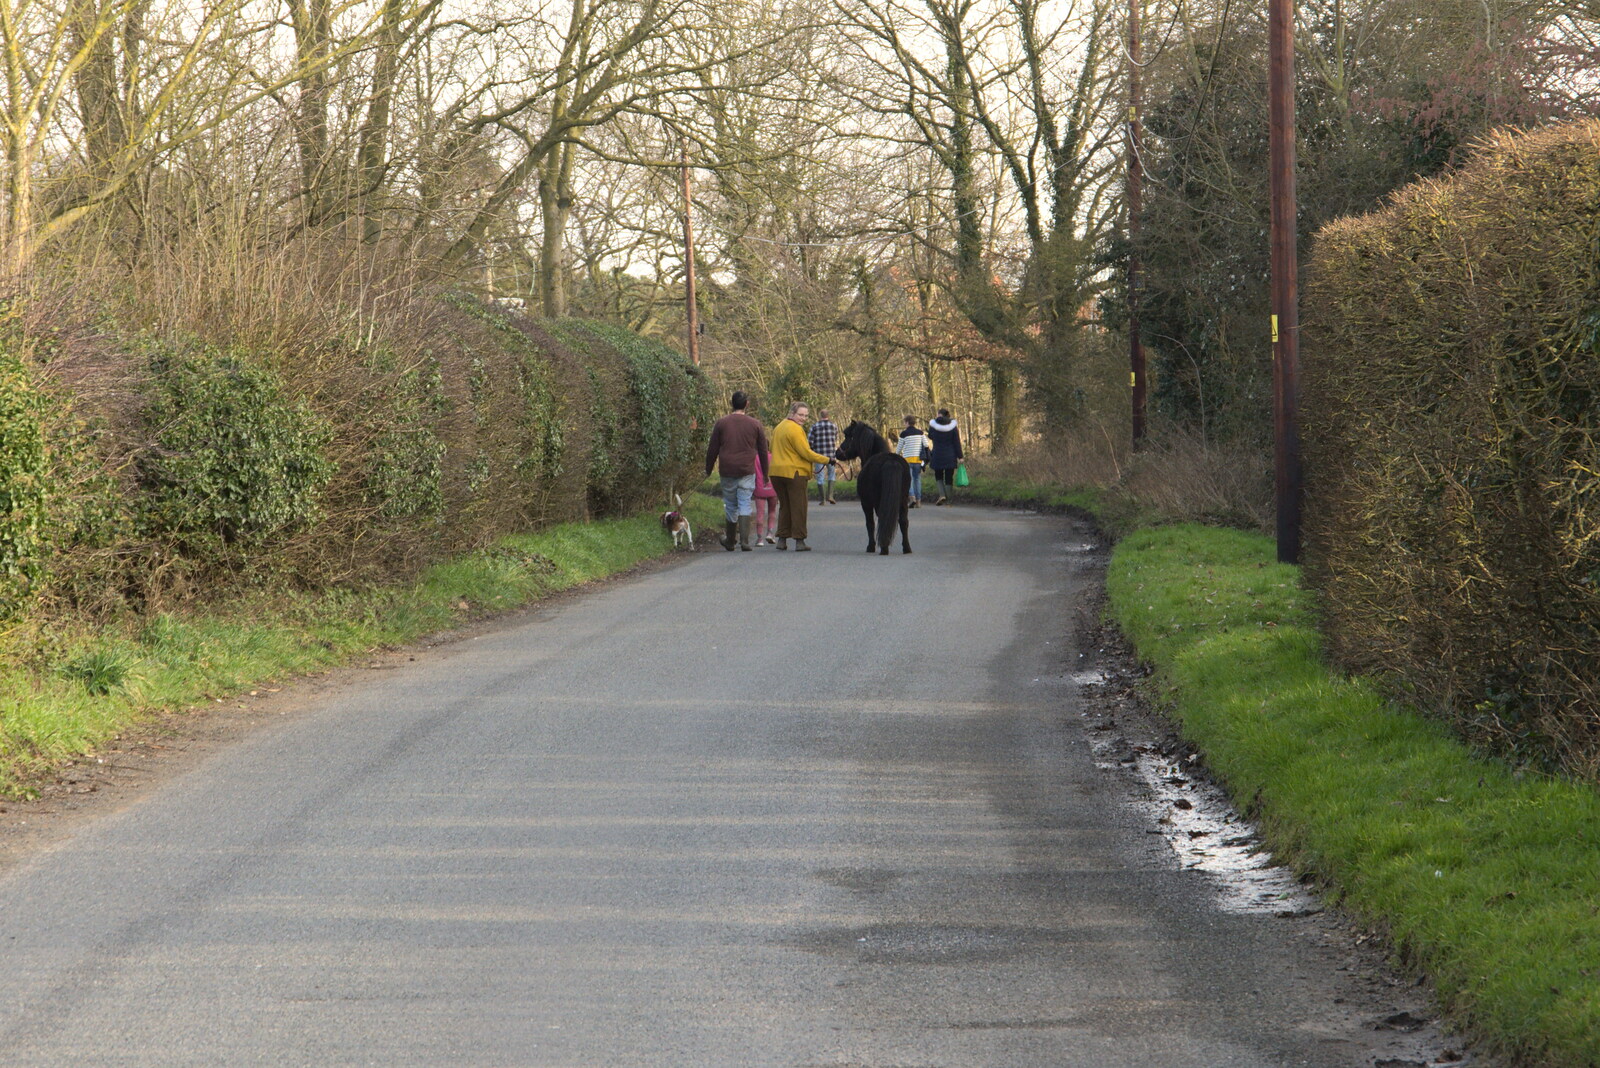 A miniature pony goes for a walk from Fred's New Bike and an A140 Closure, Brome, Suffolk - 27th February 2021